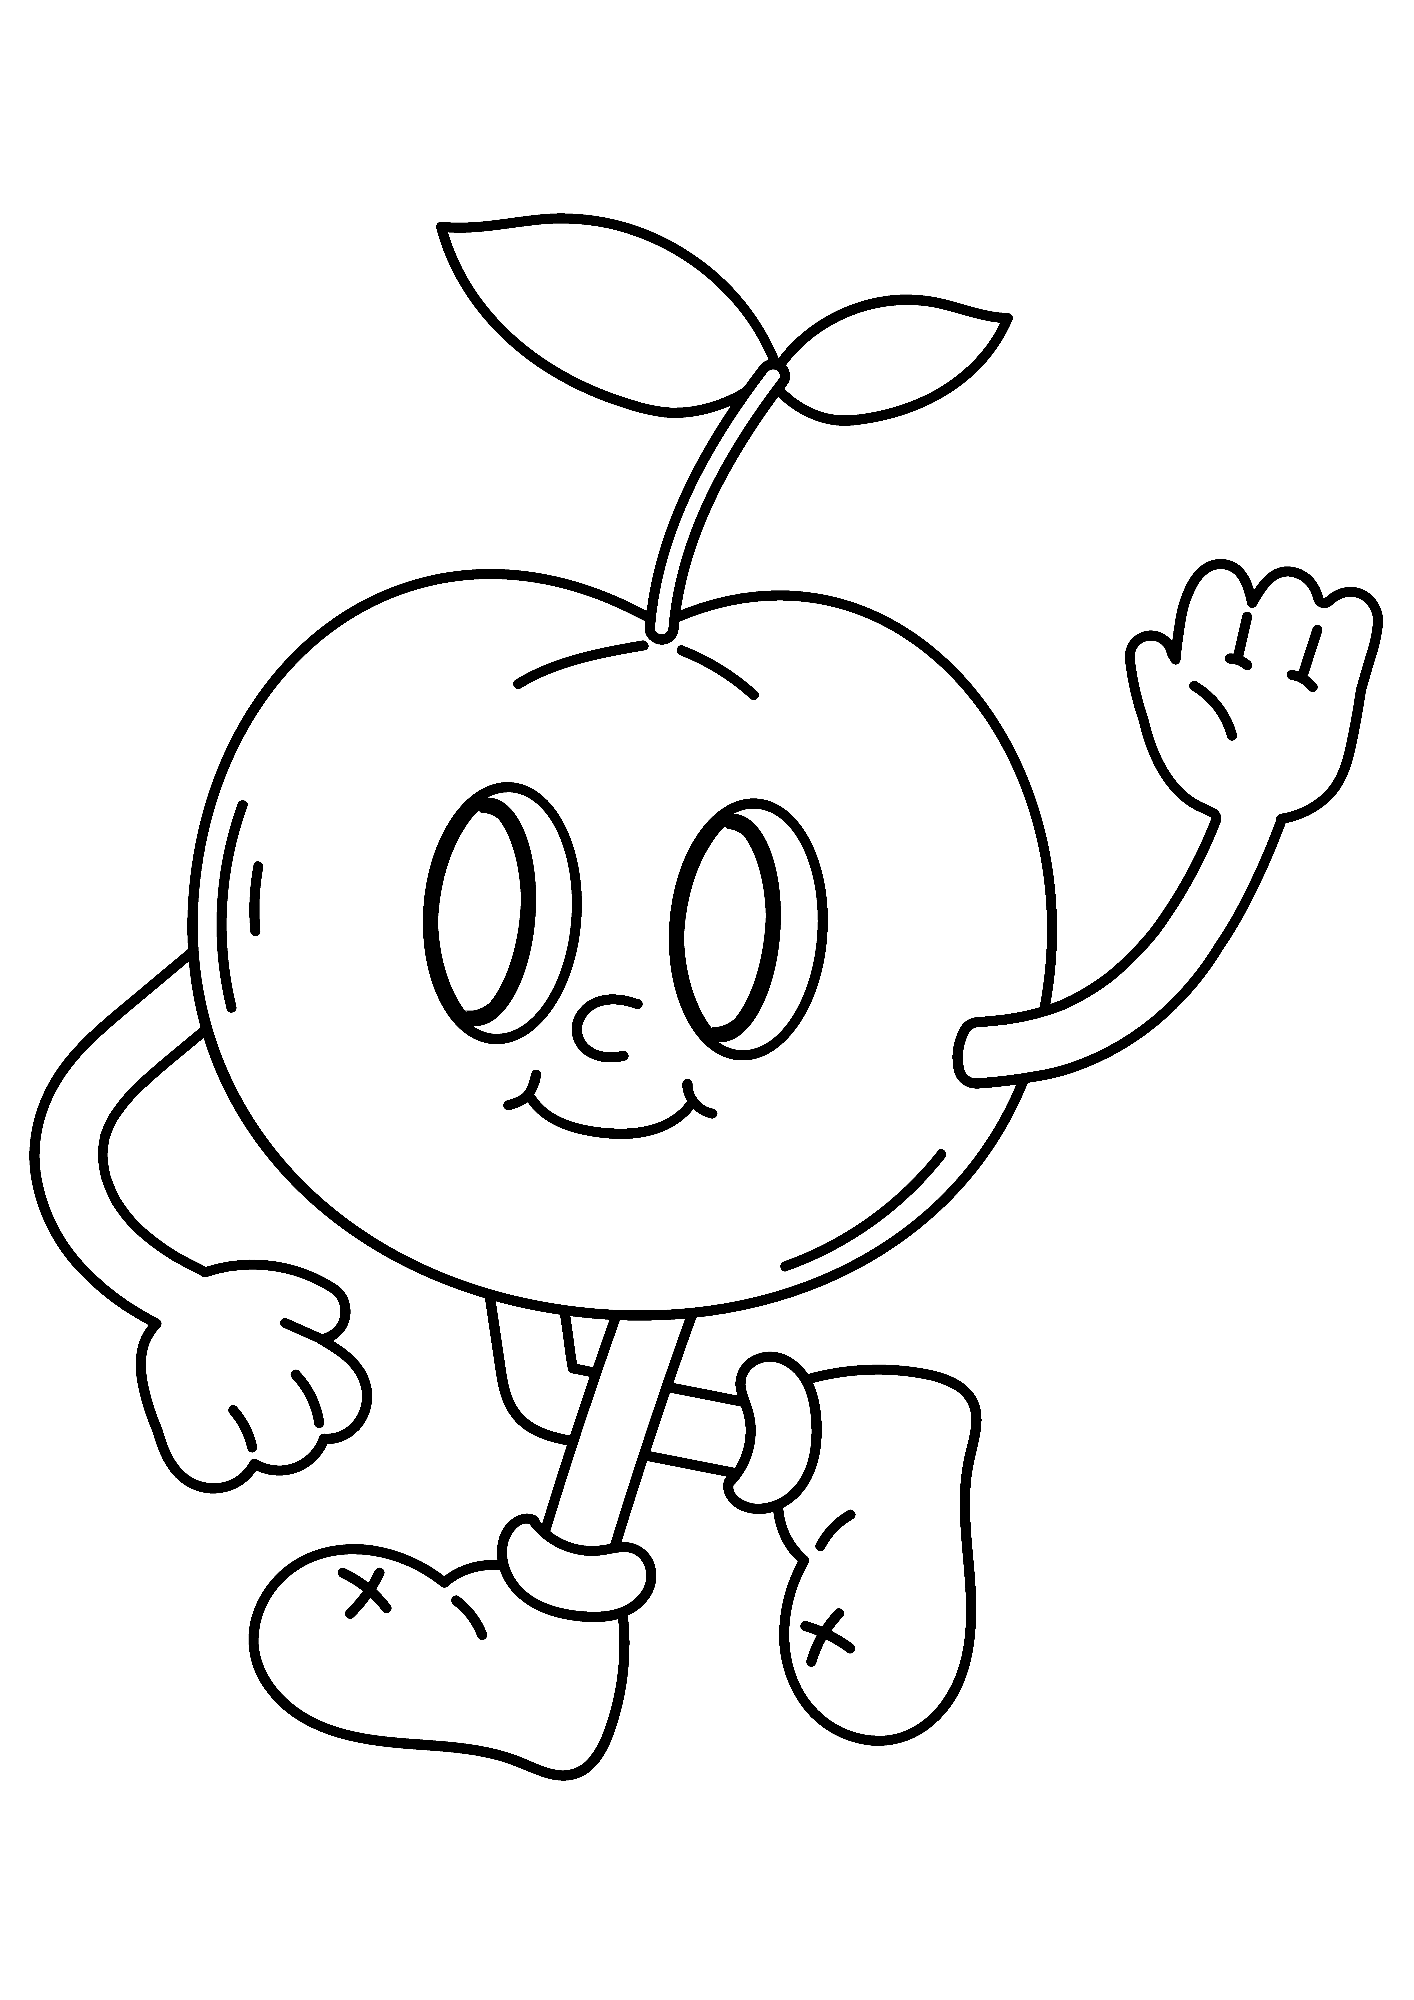 Cherry Cartoon coloring pages